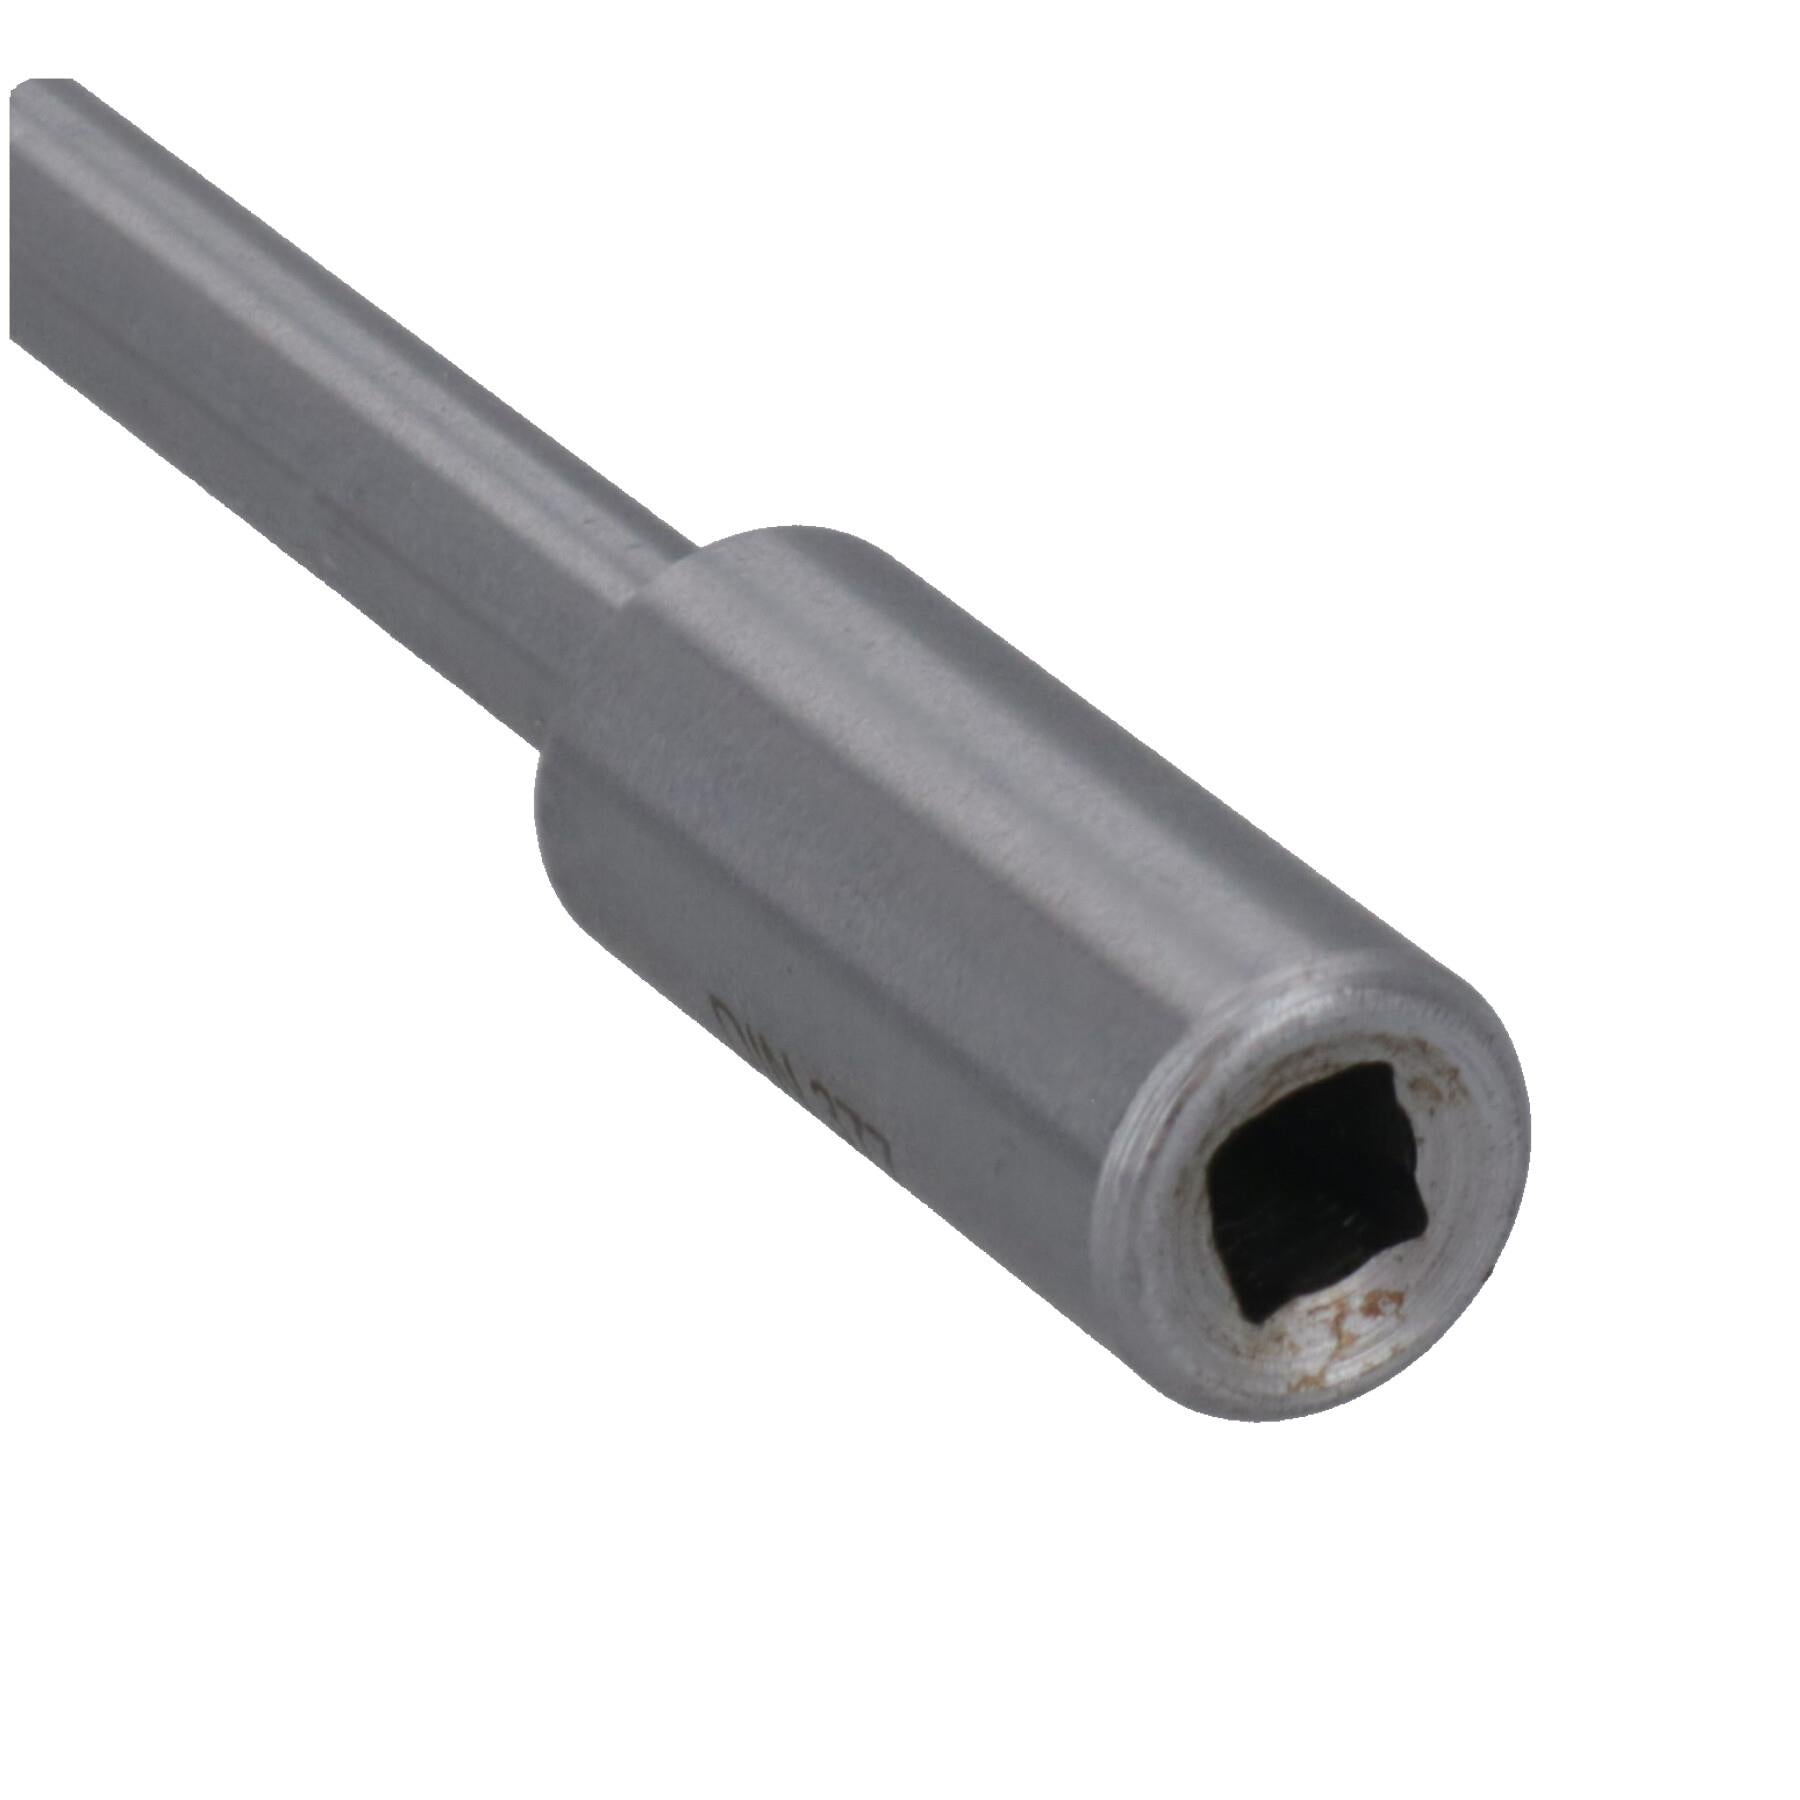 Rethreading Tap Extension Sleeve For Taps with 4.9mm Square DIN 377